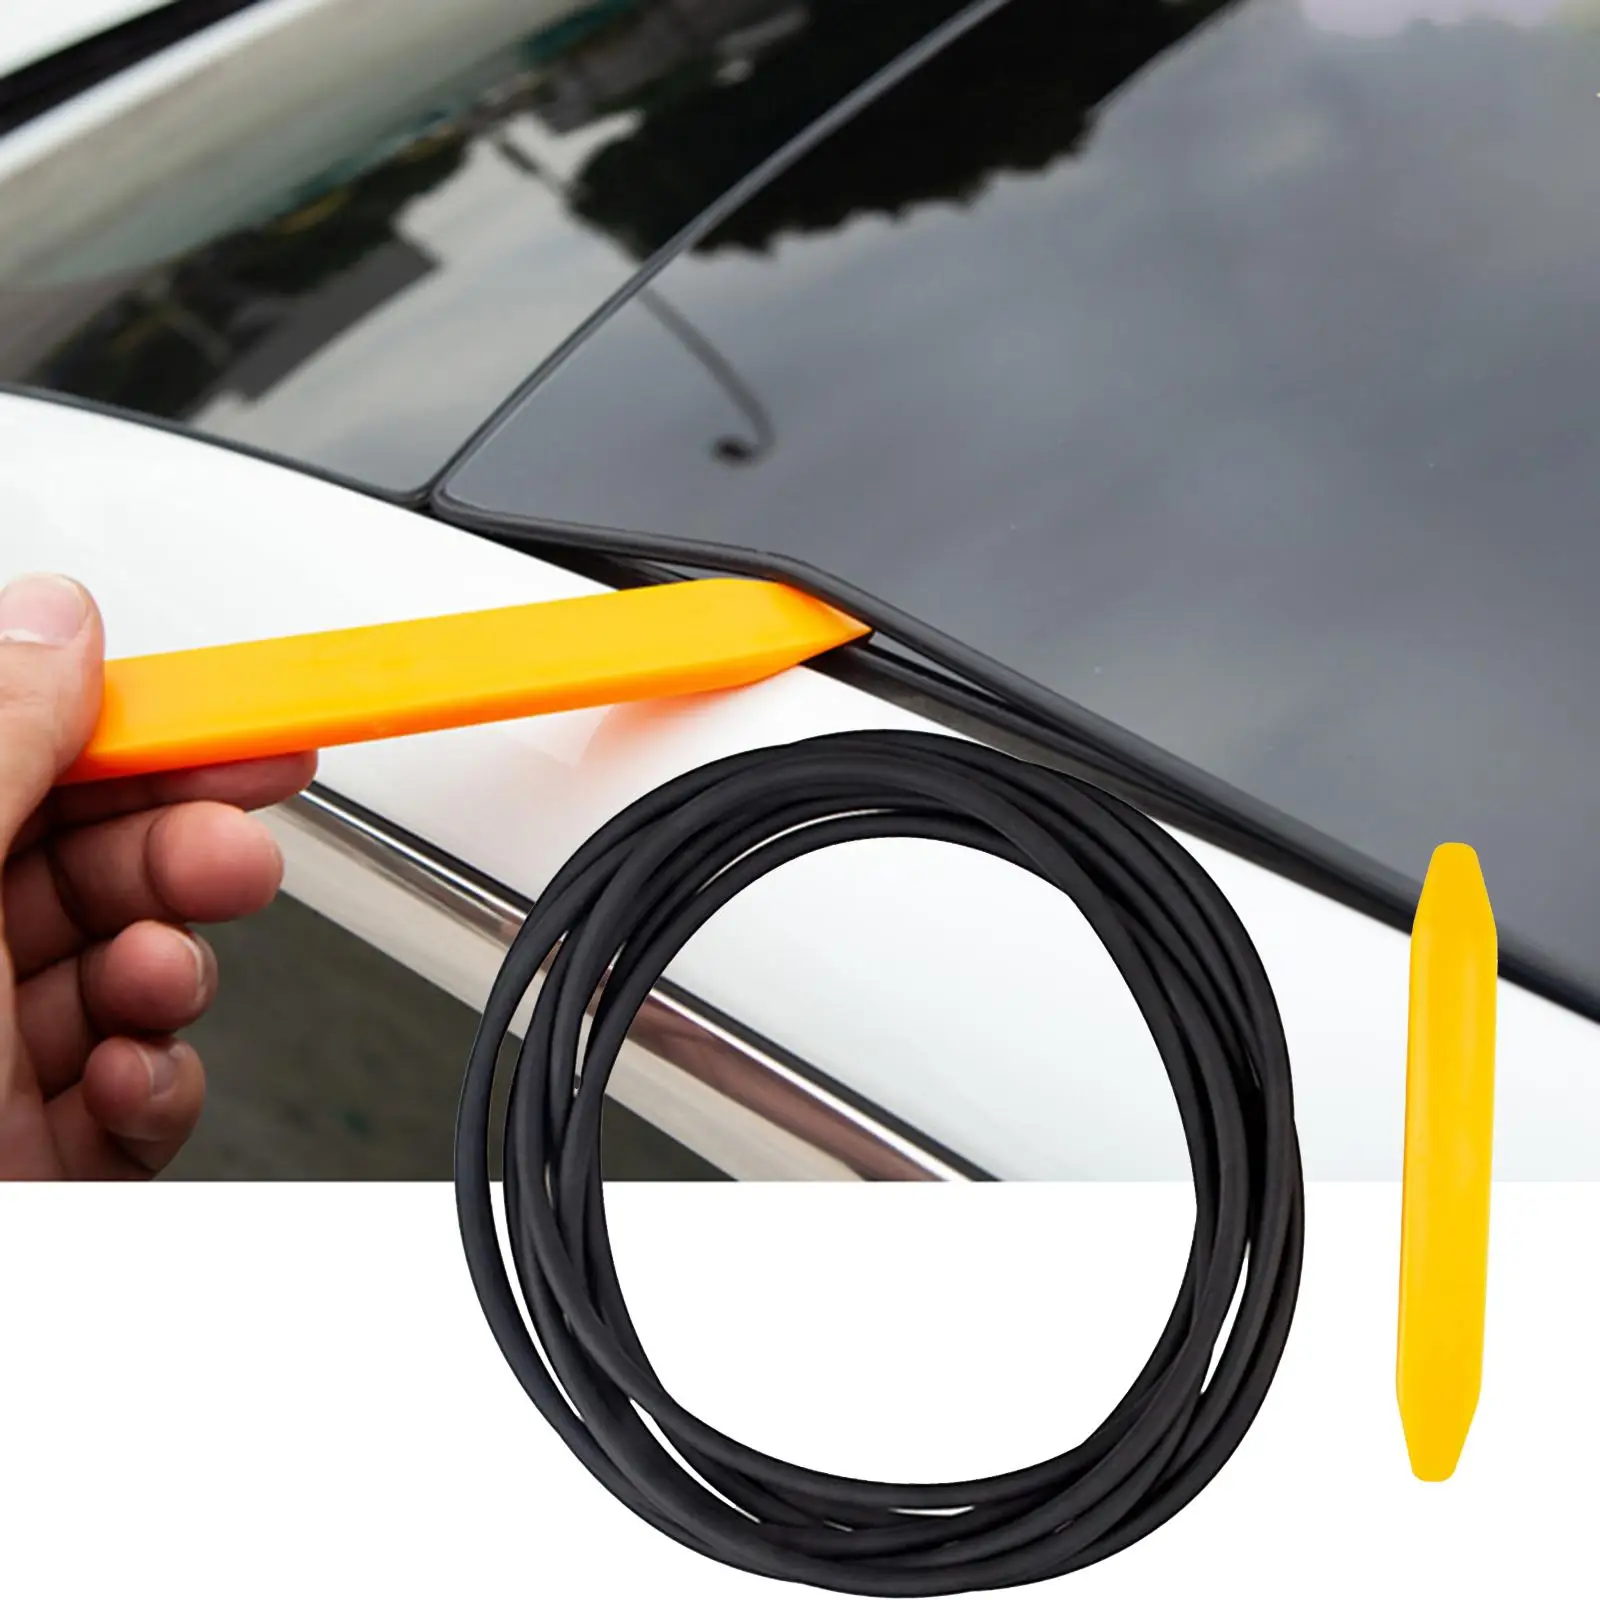 Sunroof Sealing Strip trim Dust Proof Glass Seal rings Strip Sound Insulation Skylight Sealing Strip for 